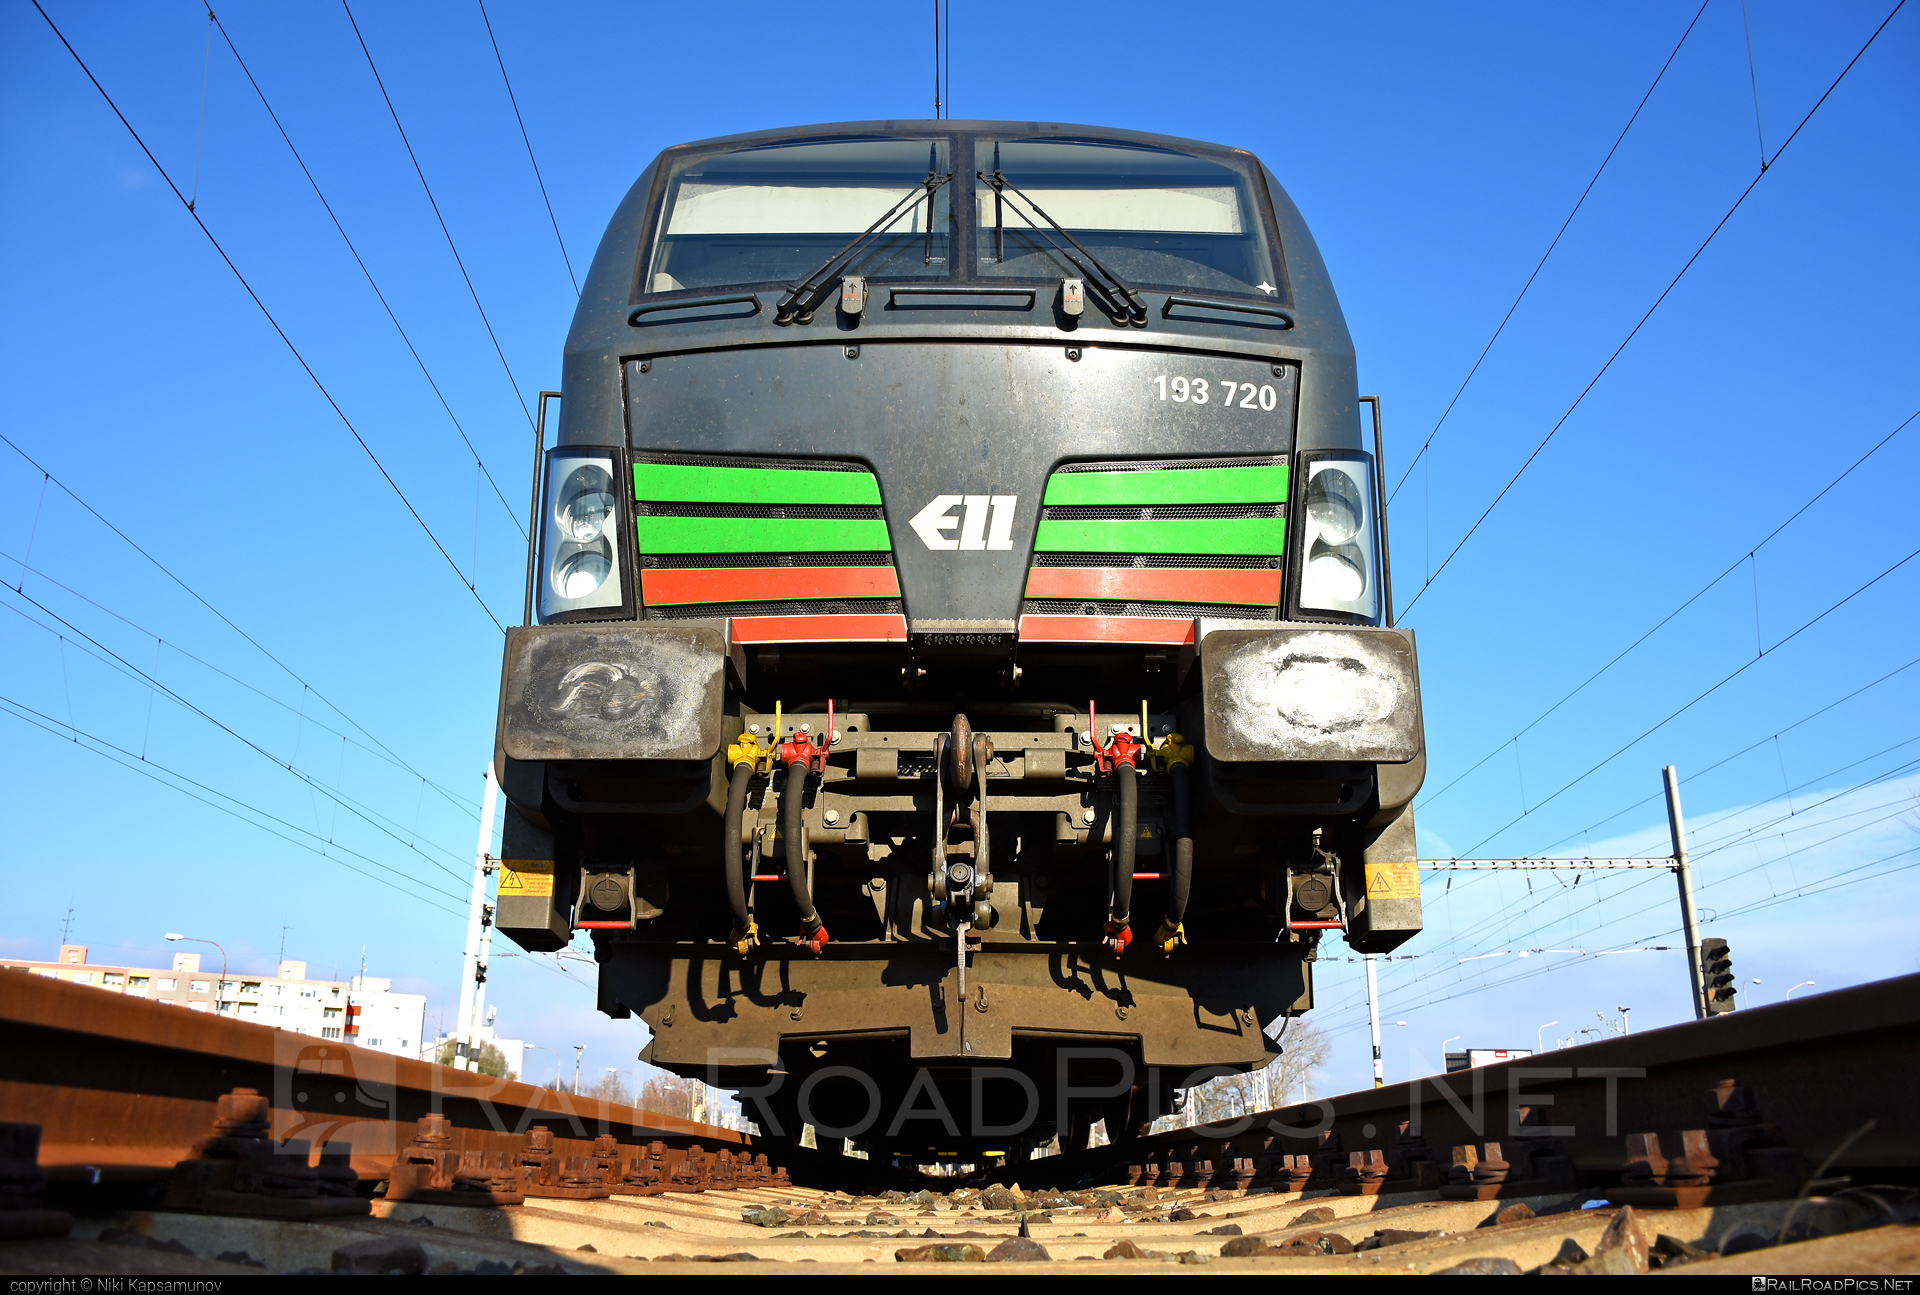 Siemens Vectron MS - 193 720 operated by LTE Logistik und Transport GmbH #ell #ellgermany #eloc #europeanlocomotiveleasing #lte #ltelogistikundtransport #ltelogistikundtransportgmbh #siemens #siemensVectron #siemensVectronMS #vectron #vectronMS